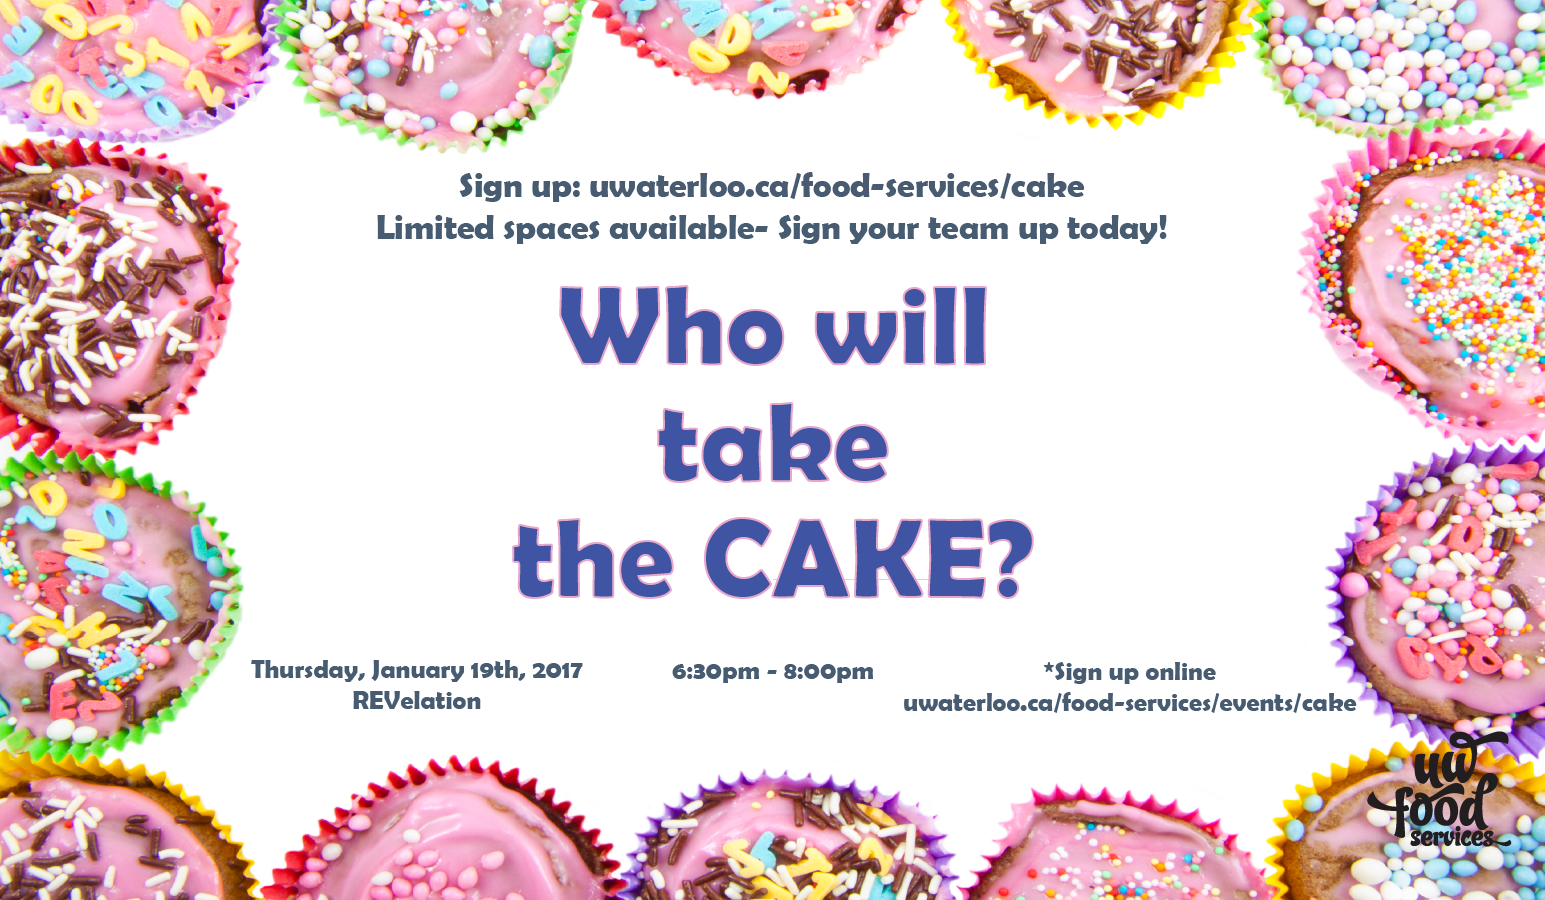 Who will take the cake? Sign up here: uwaterloo.ca/food-services/events/cake